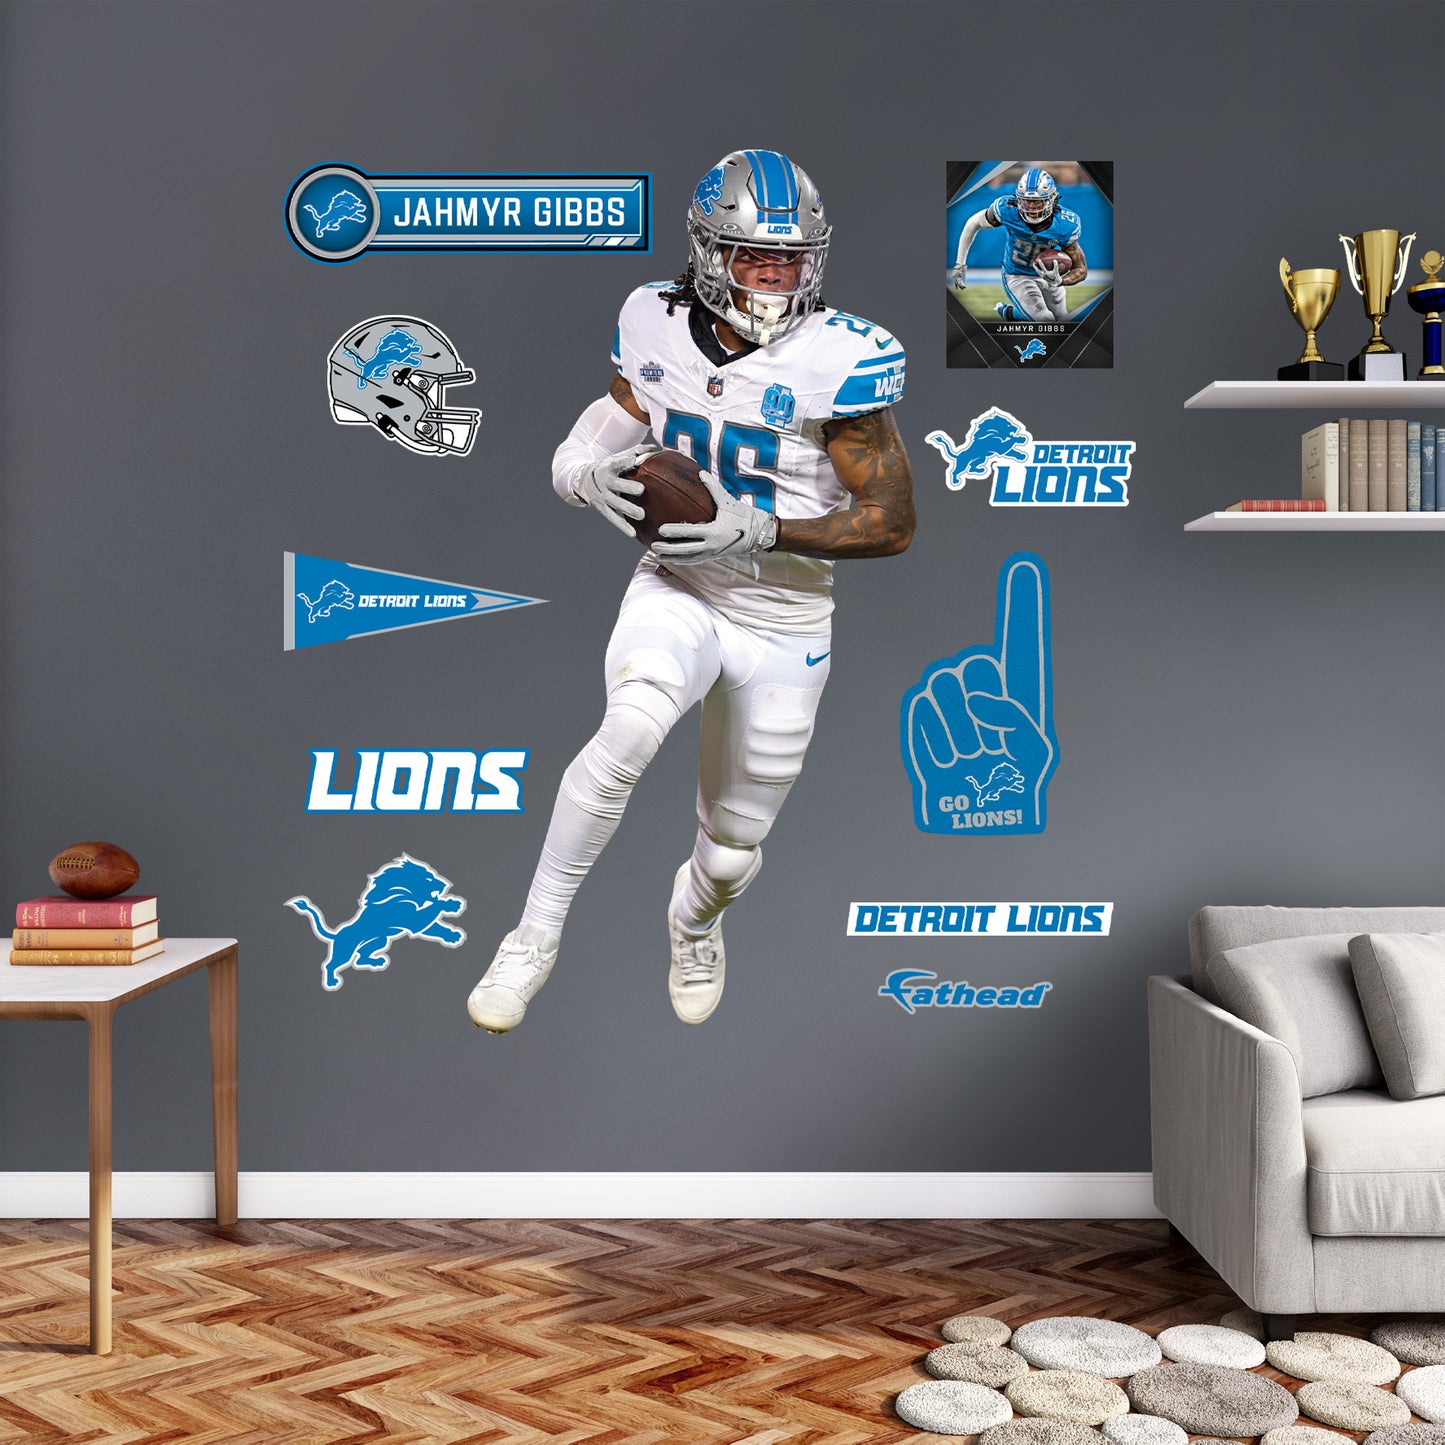 Detroit Lions: Jahmyr Gibbs         - Officially Licensed NFL Removable     Adhesive Decal